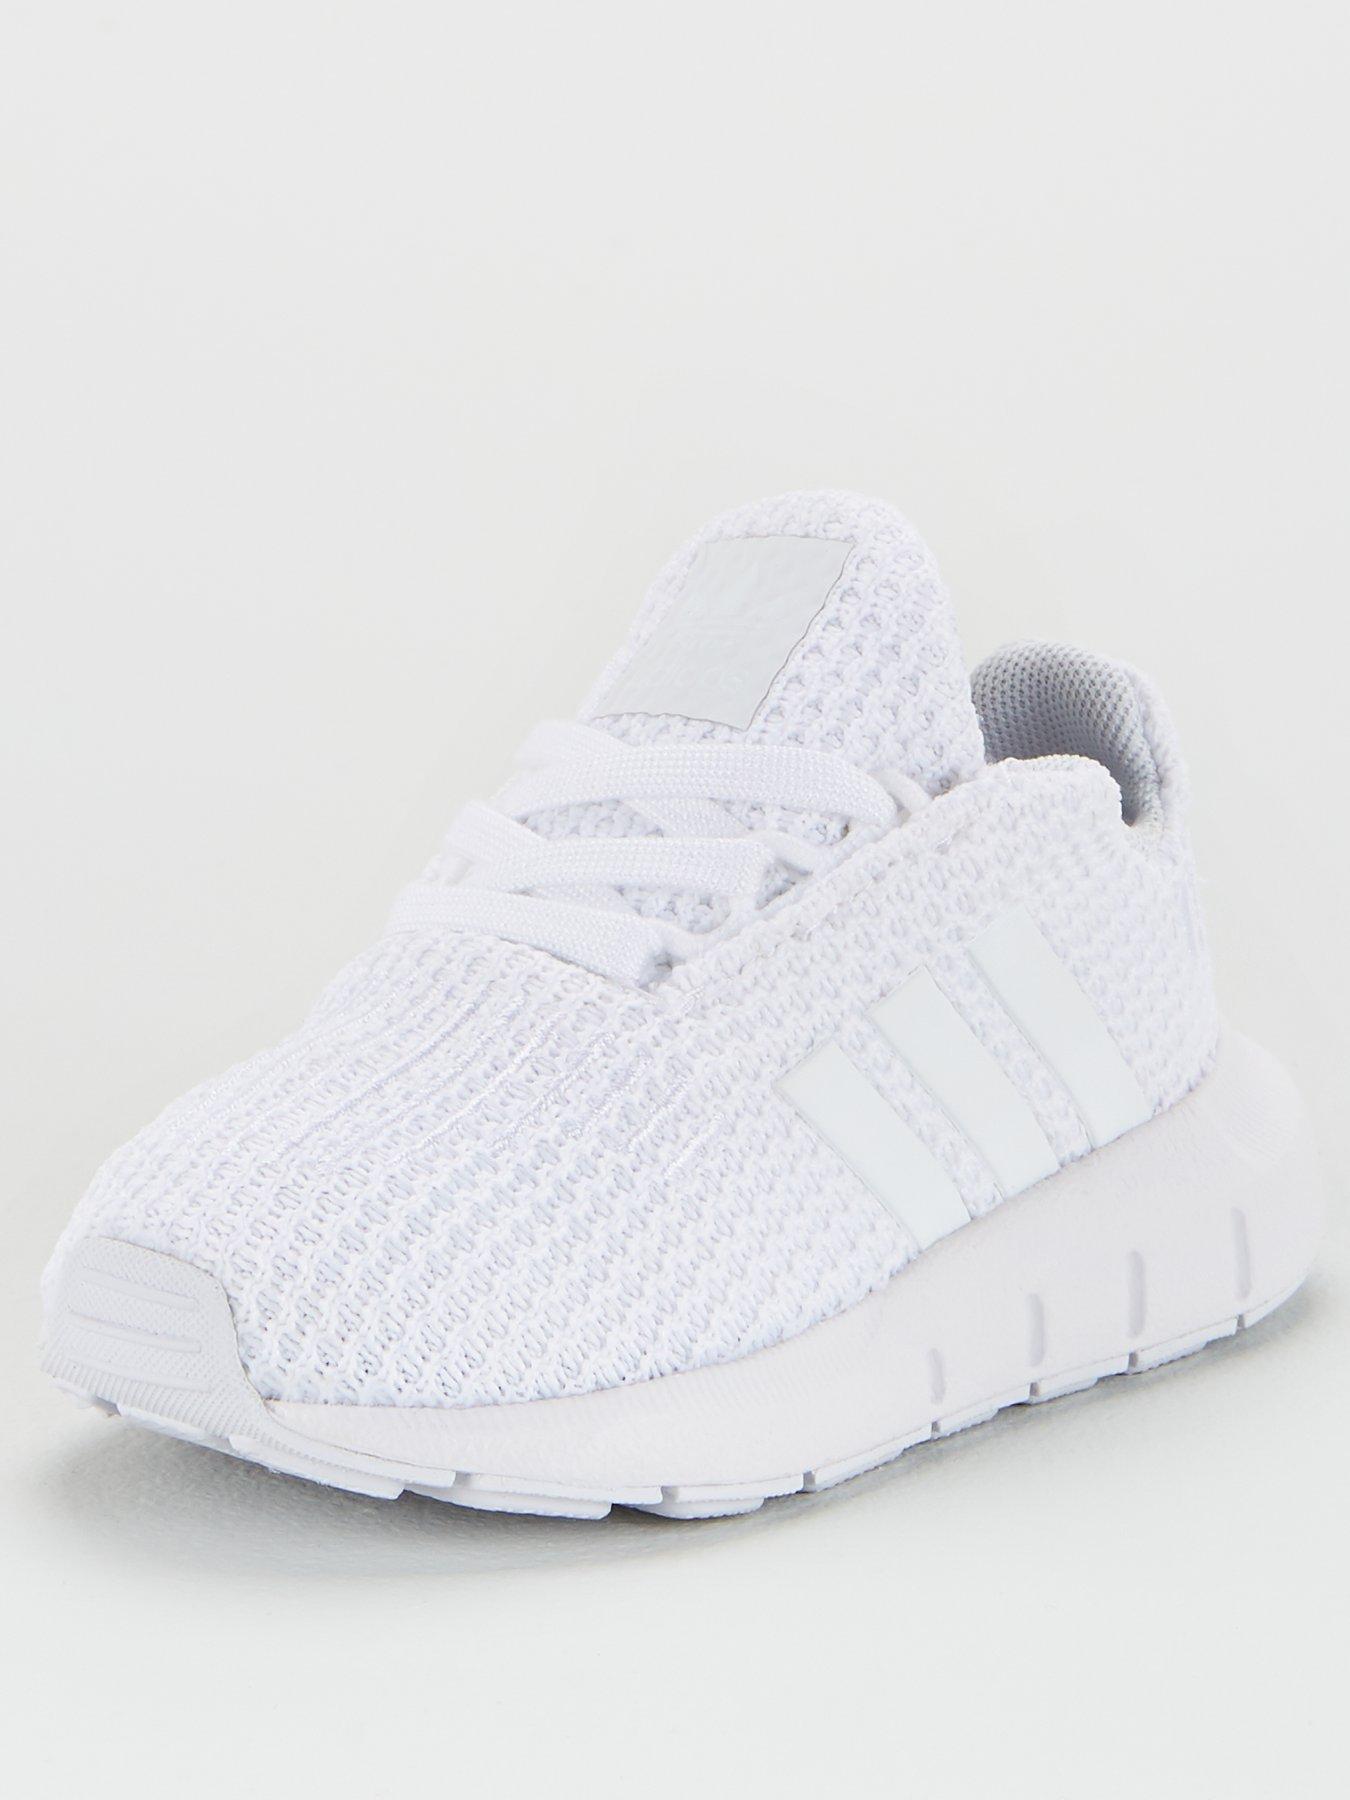 adidas swift infant trainers